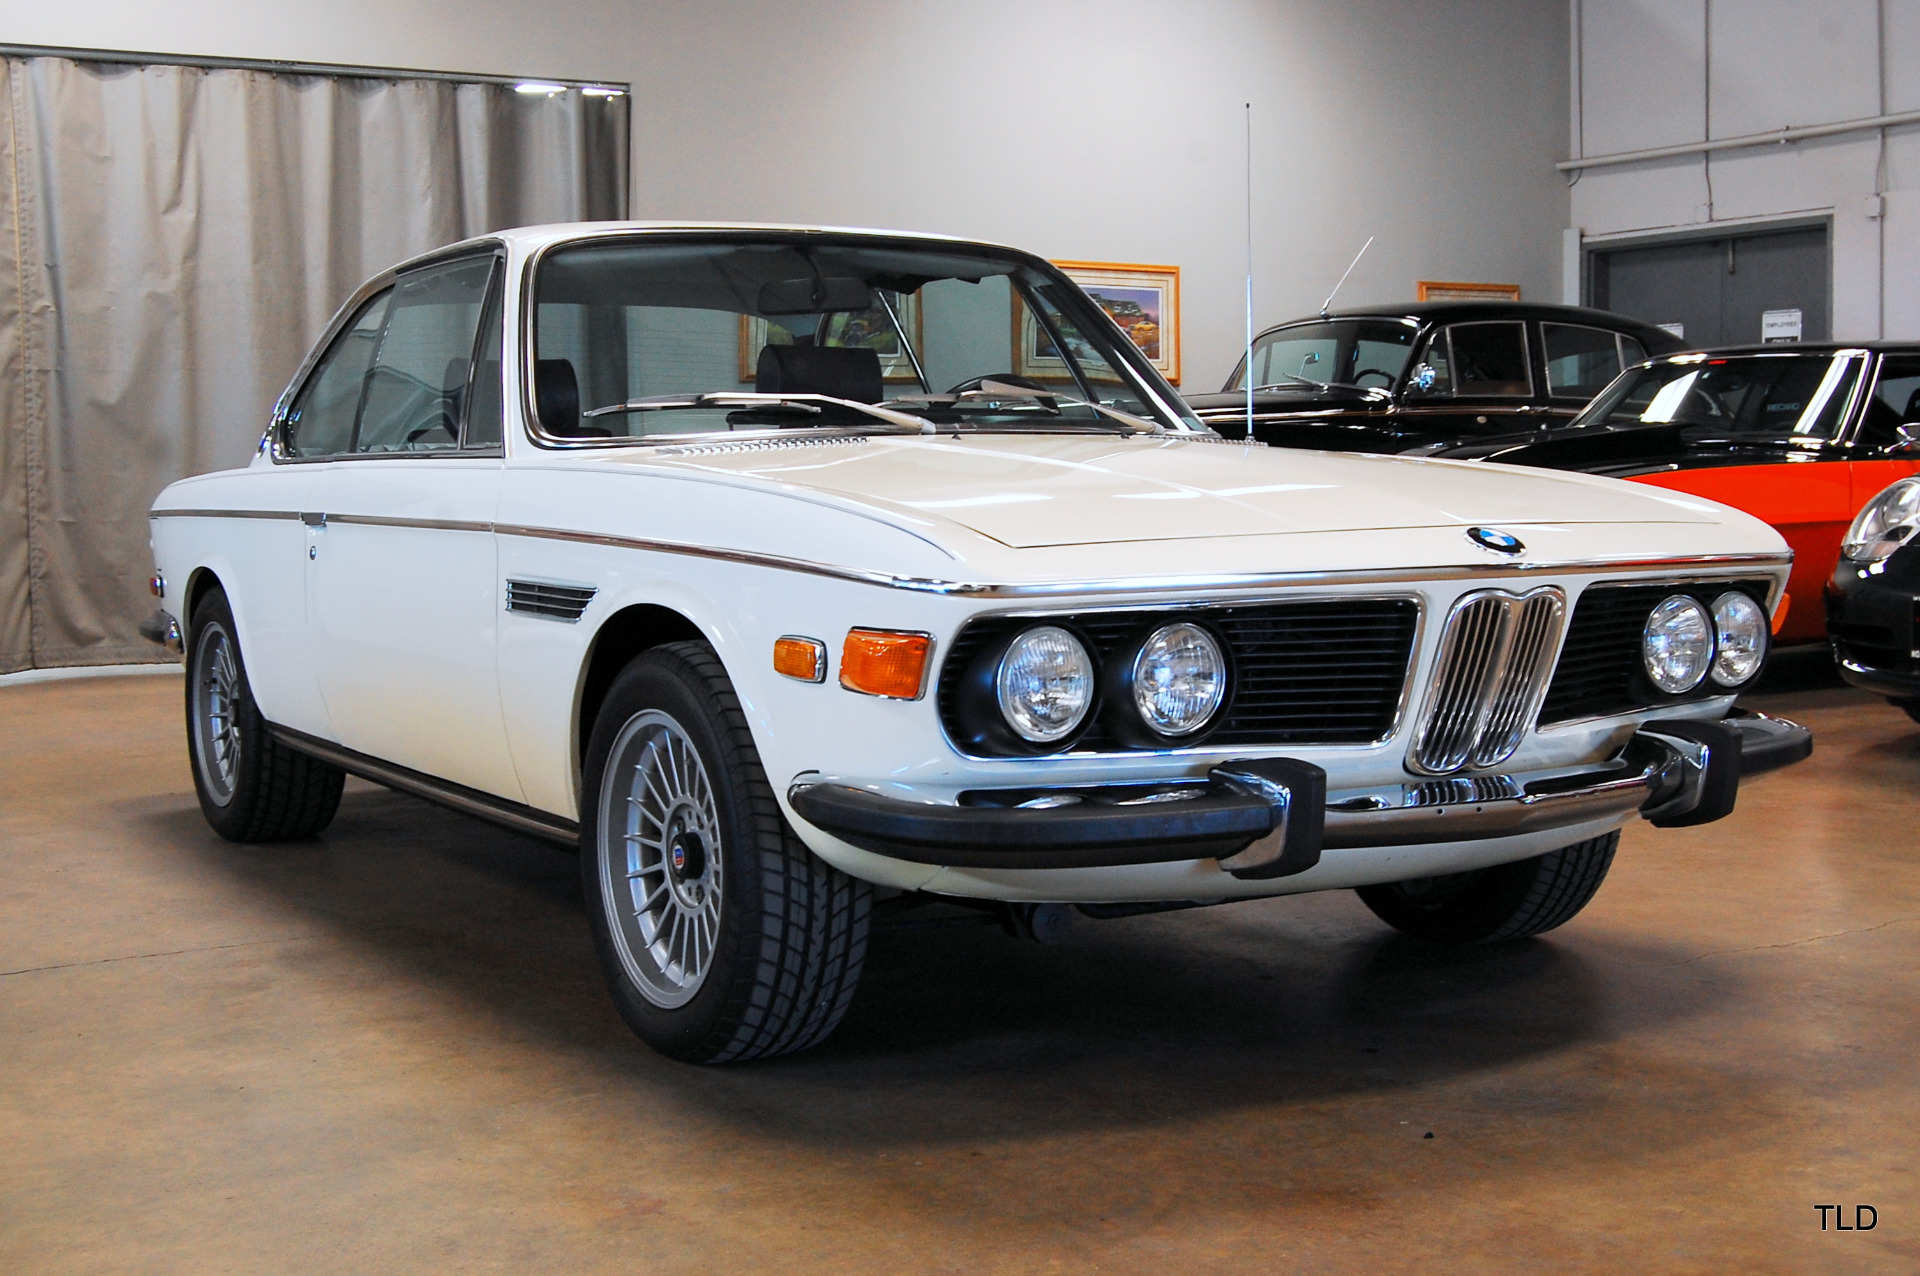 1972 BMW 3.0 CS for sale BMW 3.0 CS 1972 for sale in Local pickup only